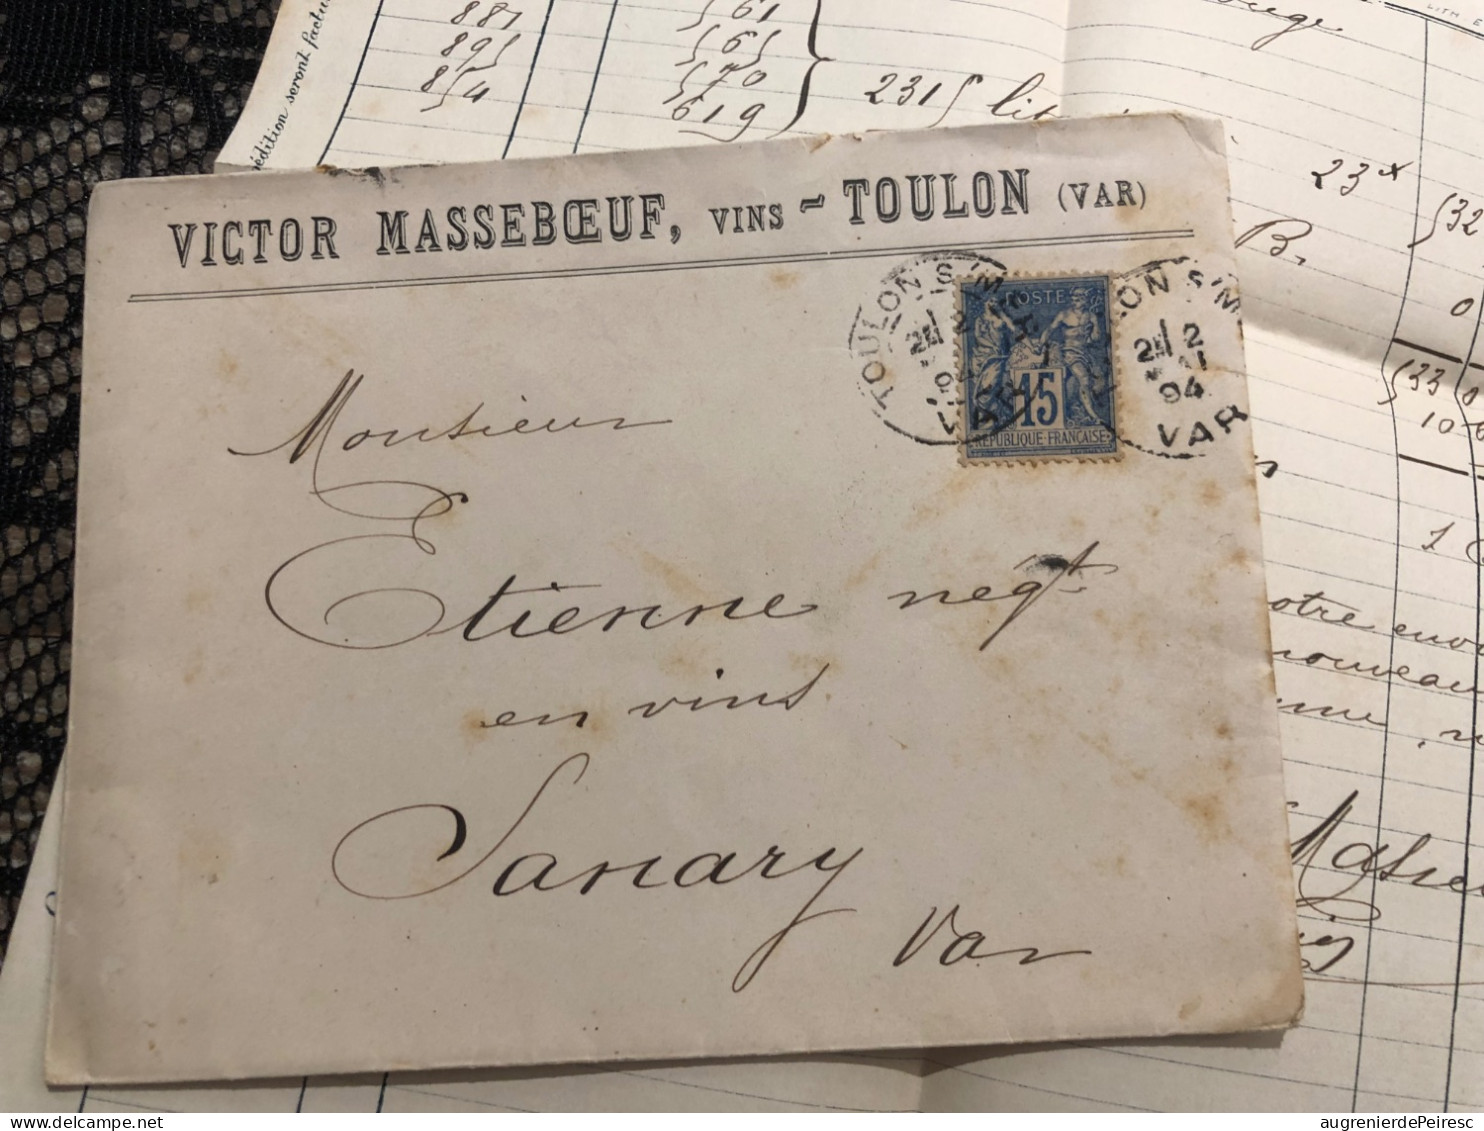 Vins Victor Masseboeuf 1894 Toulon - Invoices